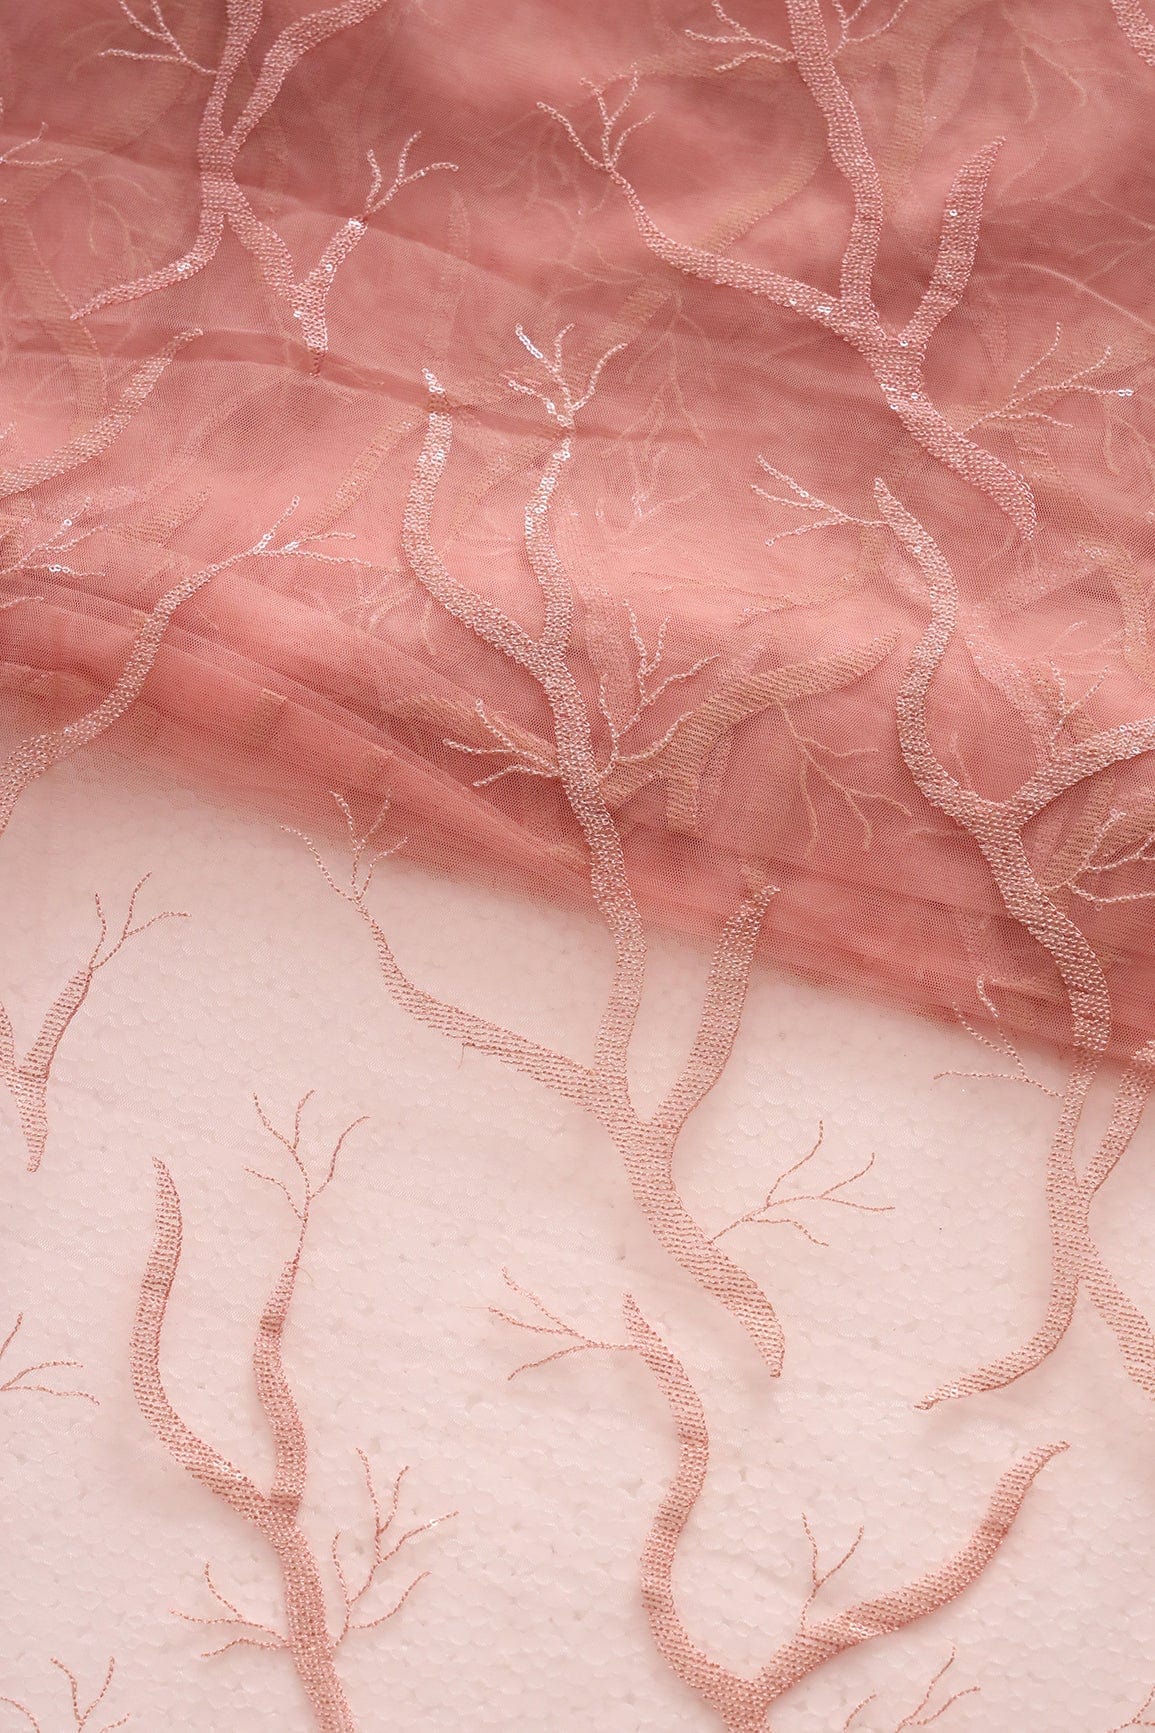 doeraa Embroidery Fabrics Pink Thread With Sequins Abstract Embroidery Work On Pink Soft Net Fabric